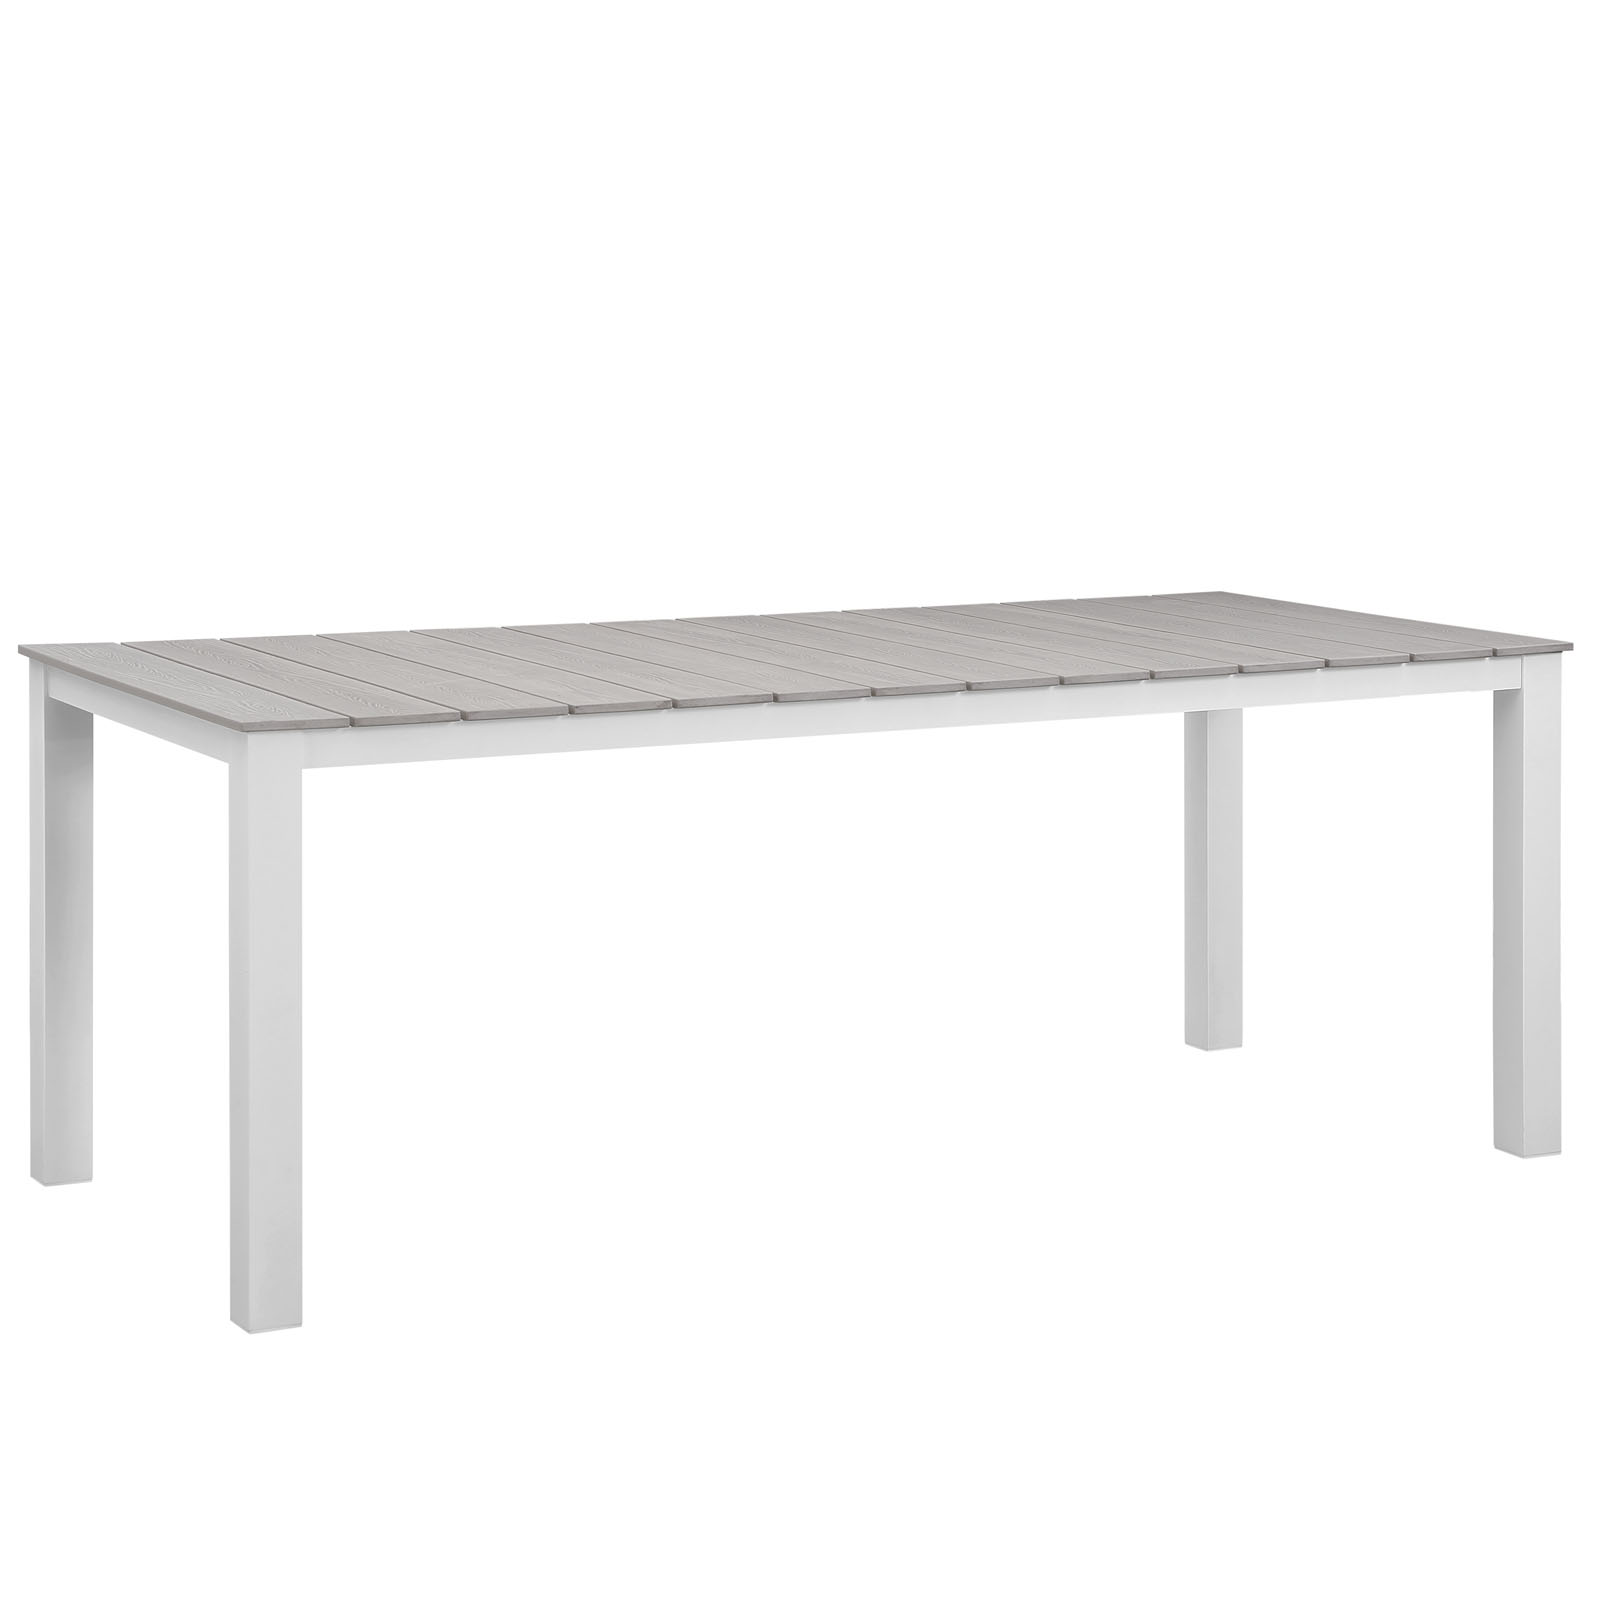 Modway Maine 80" Outdoor Patio Dining Table in White Light Gray - image 3 of 4